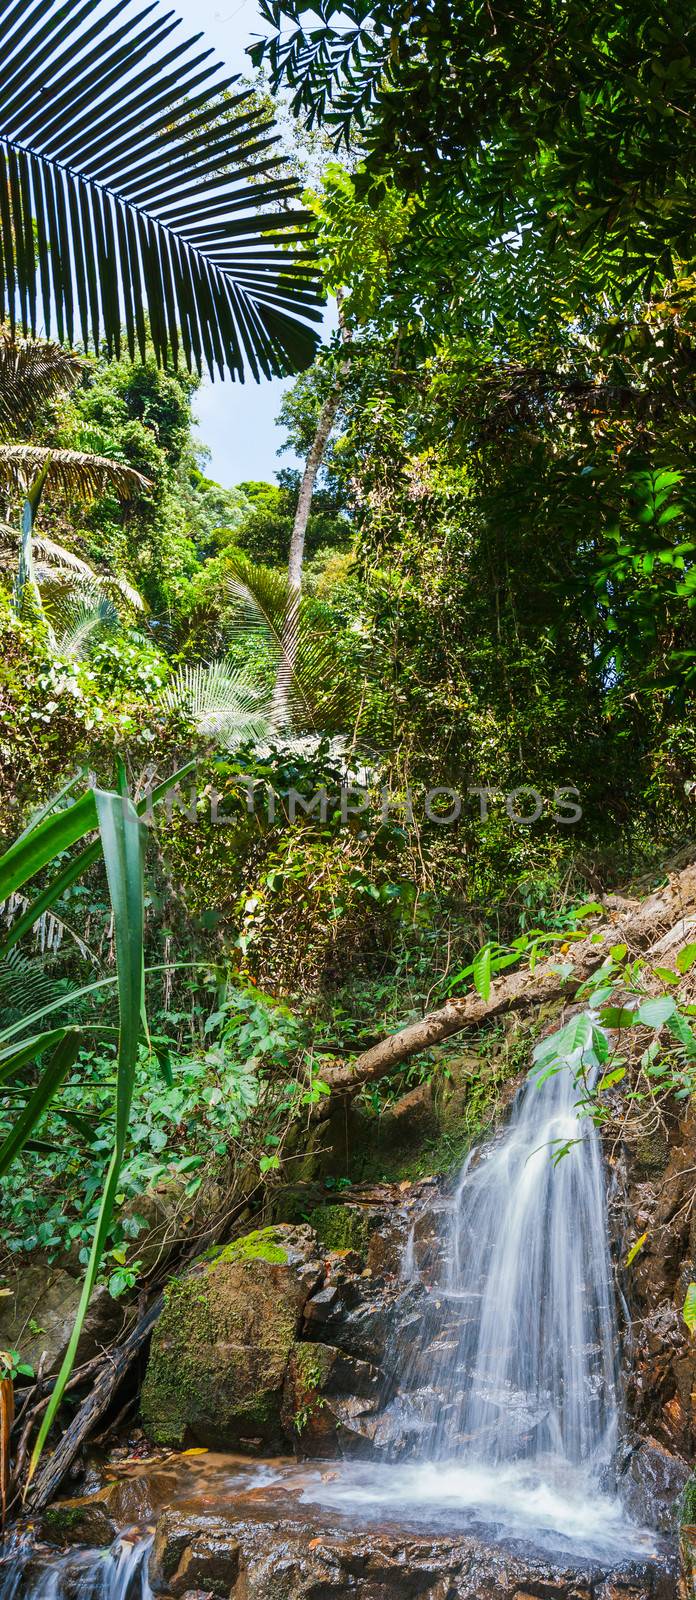 tropical jungles of South East Asia by oleg_zhukov